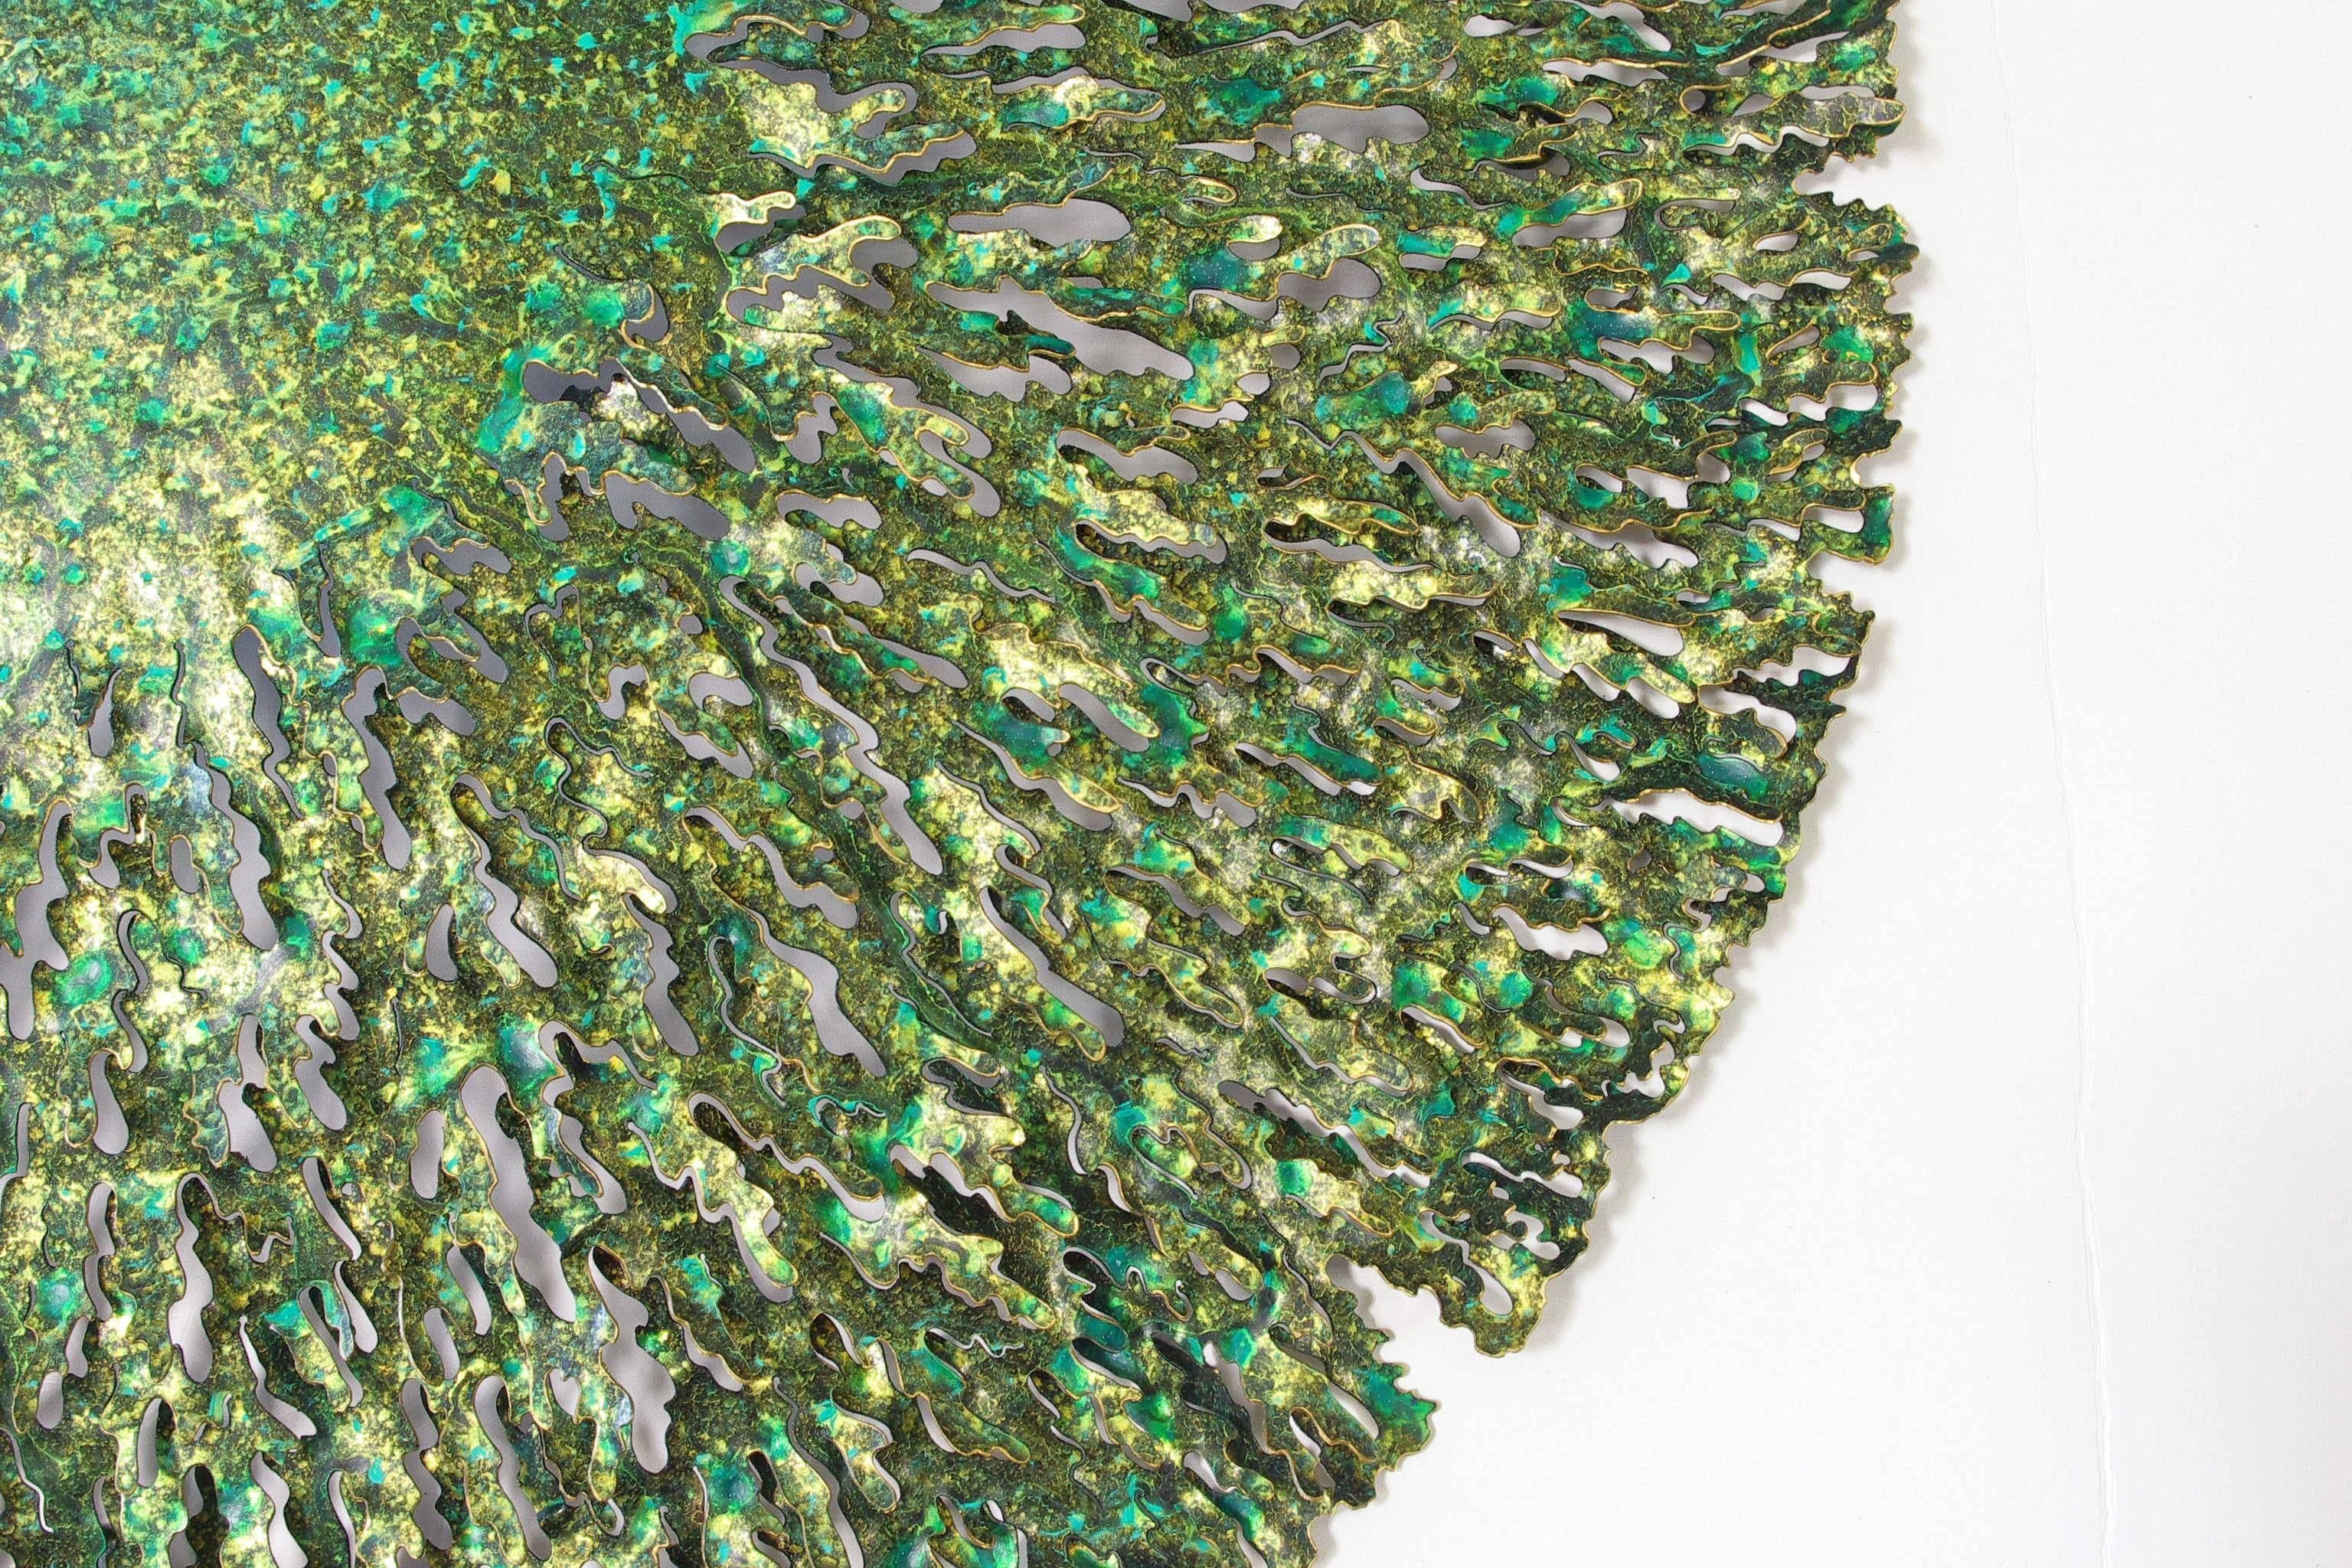 Green and gold iron seaweed wall sculpture designed by Fabio Bergomi for Fabio Ltd
Measures: Diameter 47 inches, depth 6 inches
1 in stock in Palm Springs currently ON FINAL CLEARANCE SALE for $899!!
Order reference #: FABIOLTD SC11
This piece makes